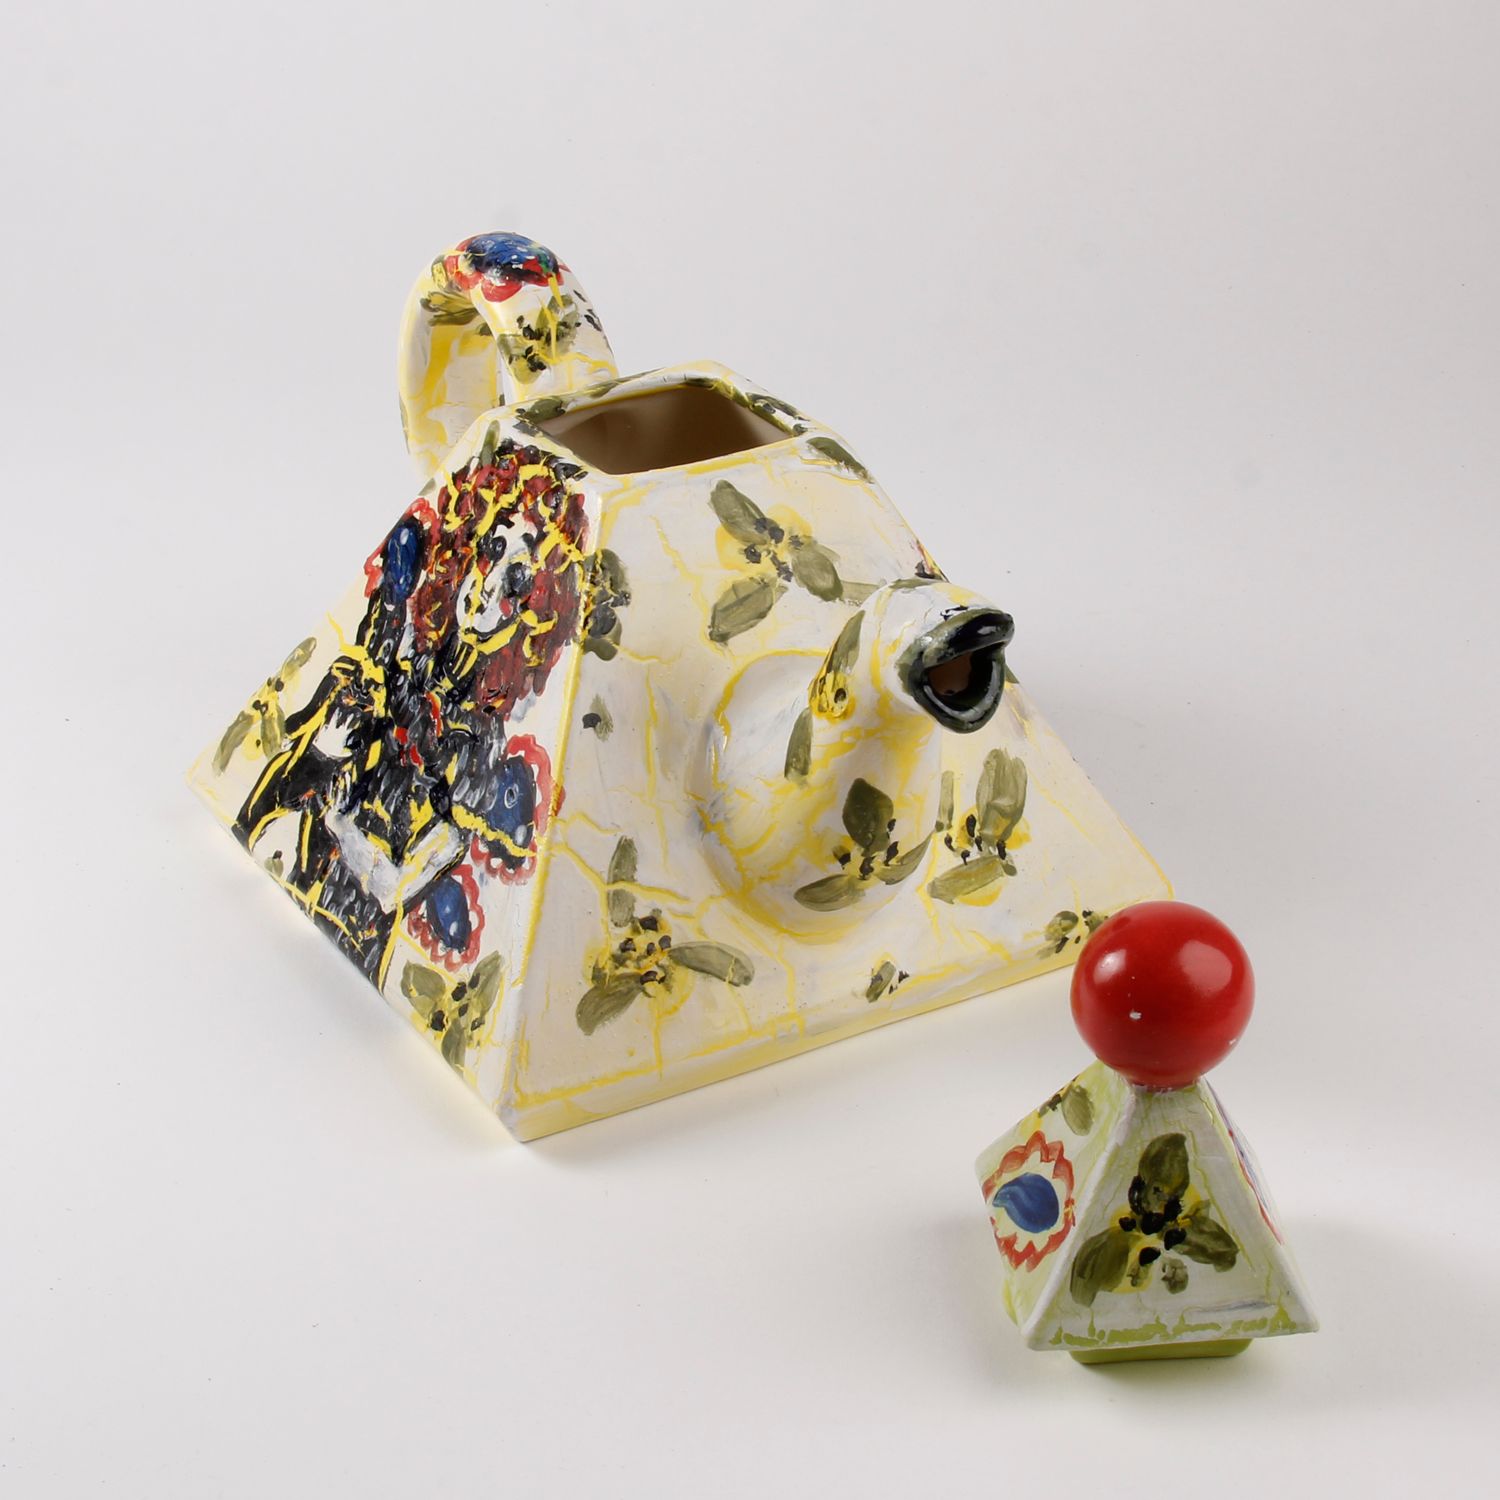 Patricia Lazar: Triangle Teapot Product Image 3 of 4